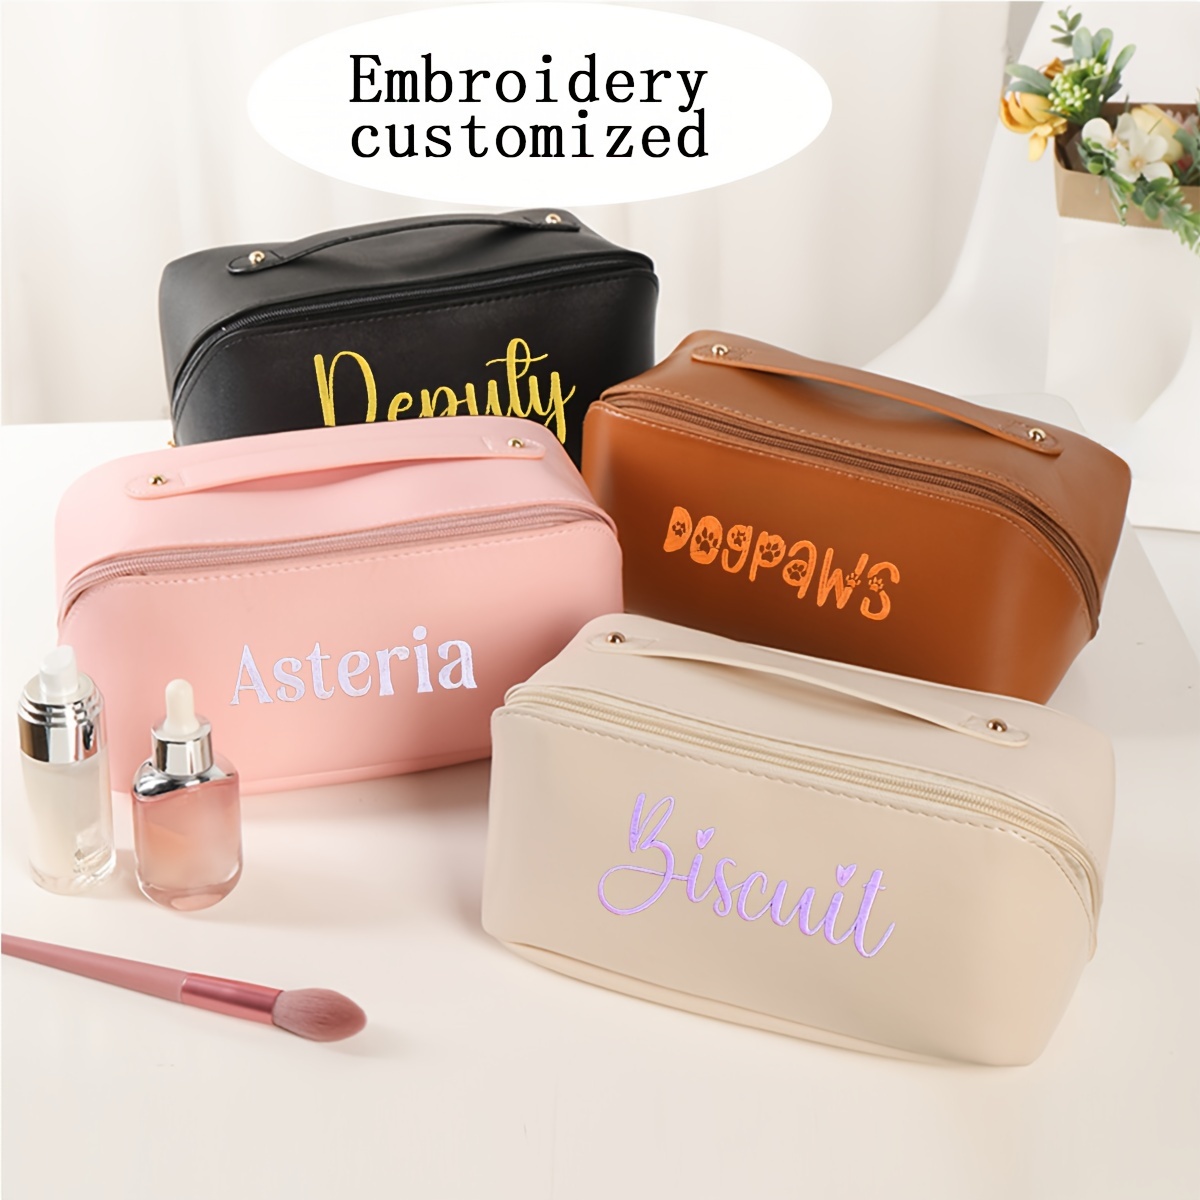 

Customized Embroidered Letters Pattern Makeup Organizer Bag, Portable Cosmetic Brush Storage Bag, Suitable For Home Travel Makeup Storage And Organization